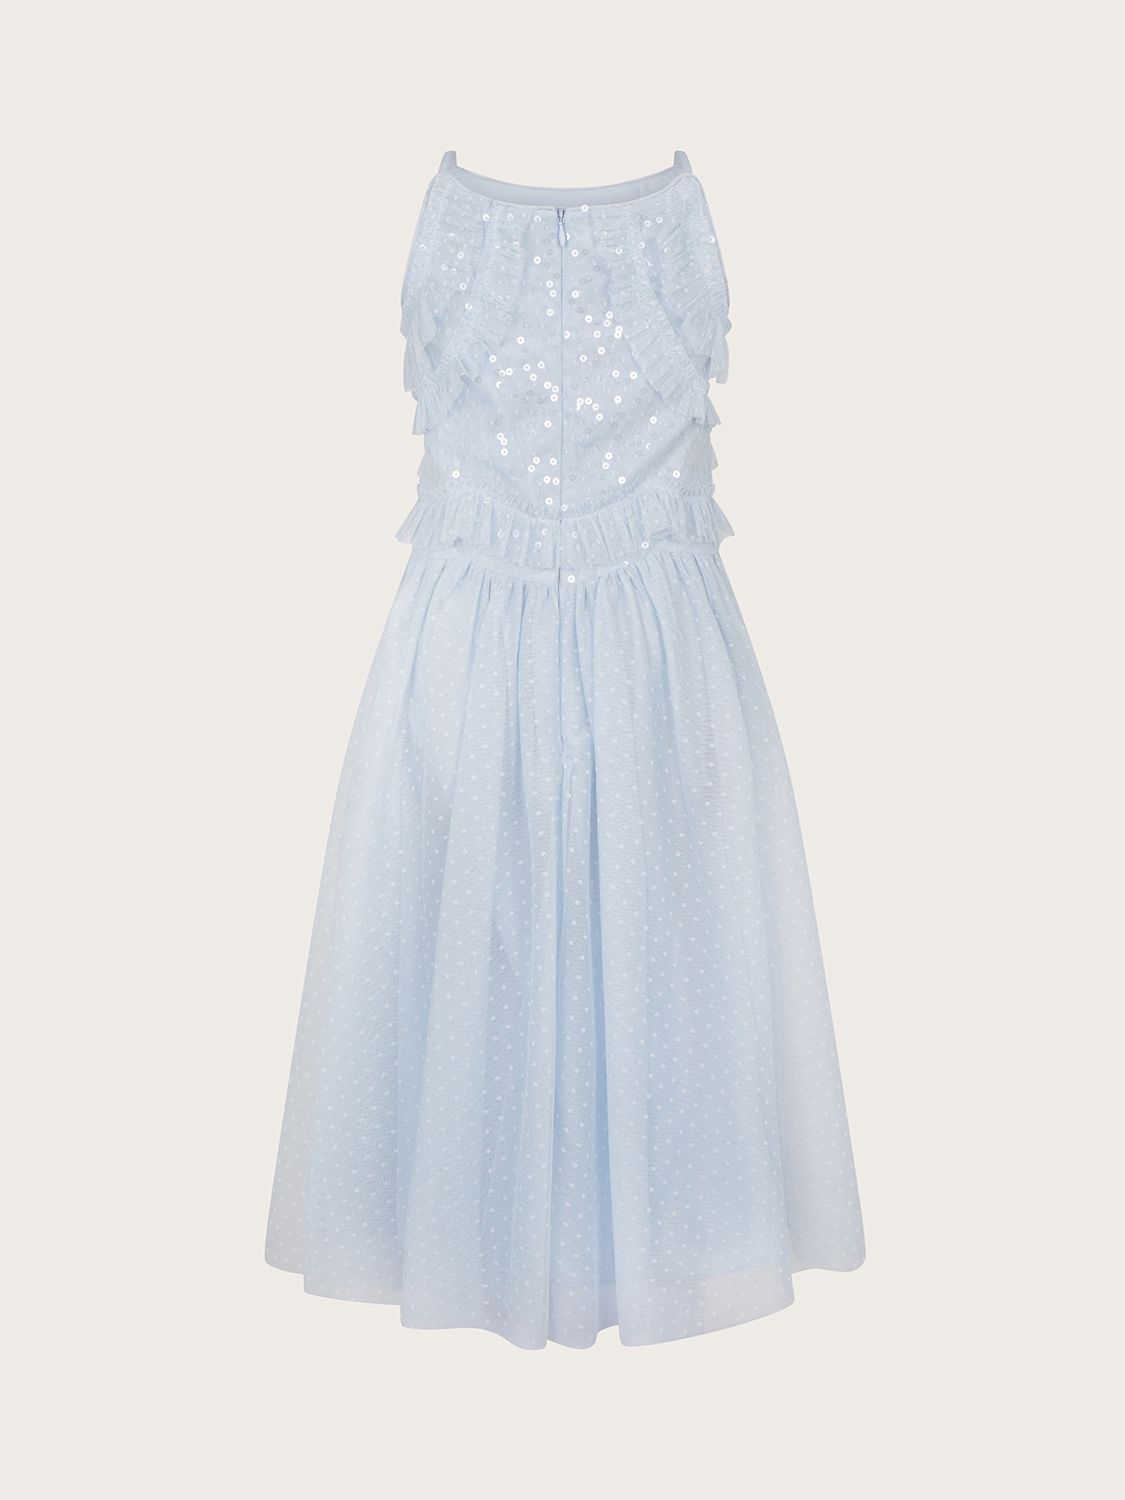 Buy Monsoon Kids' Truth Ruffle Sequin Occasion Dress, Pale Blue Online at johnlewis.com